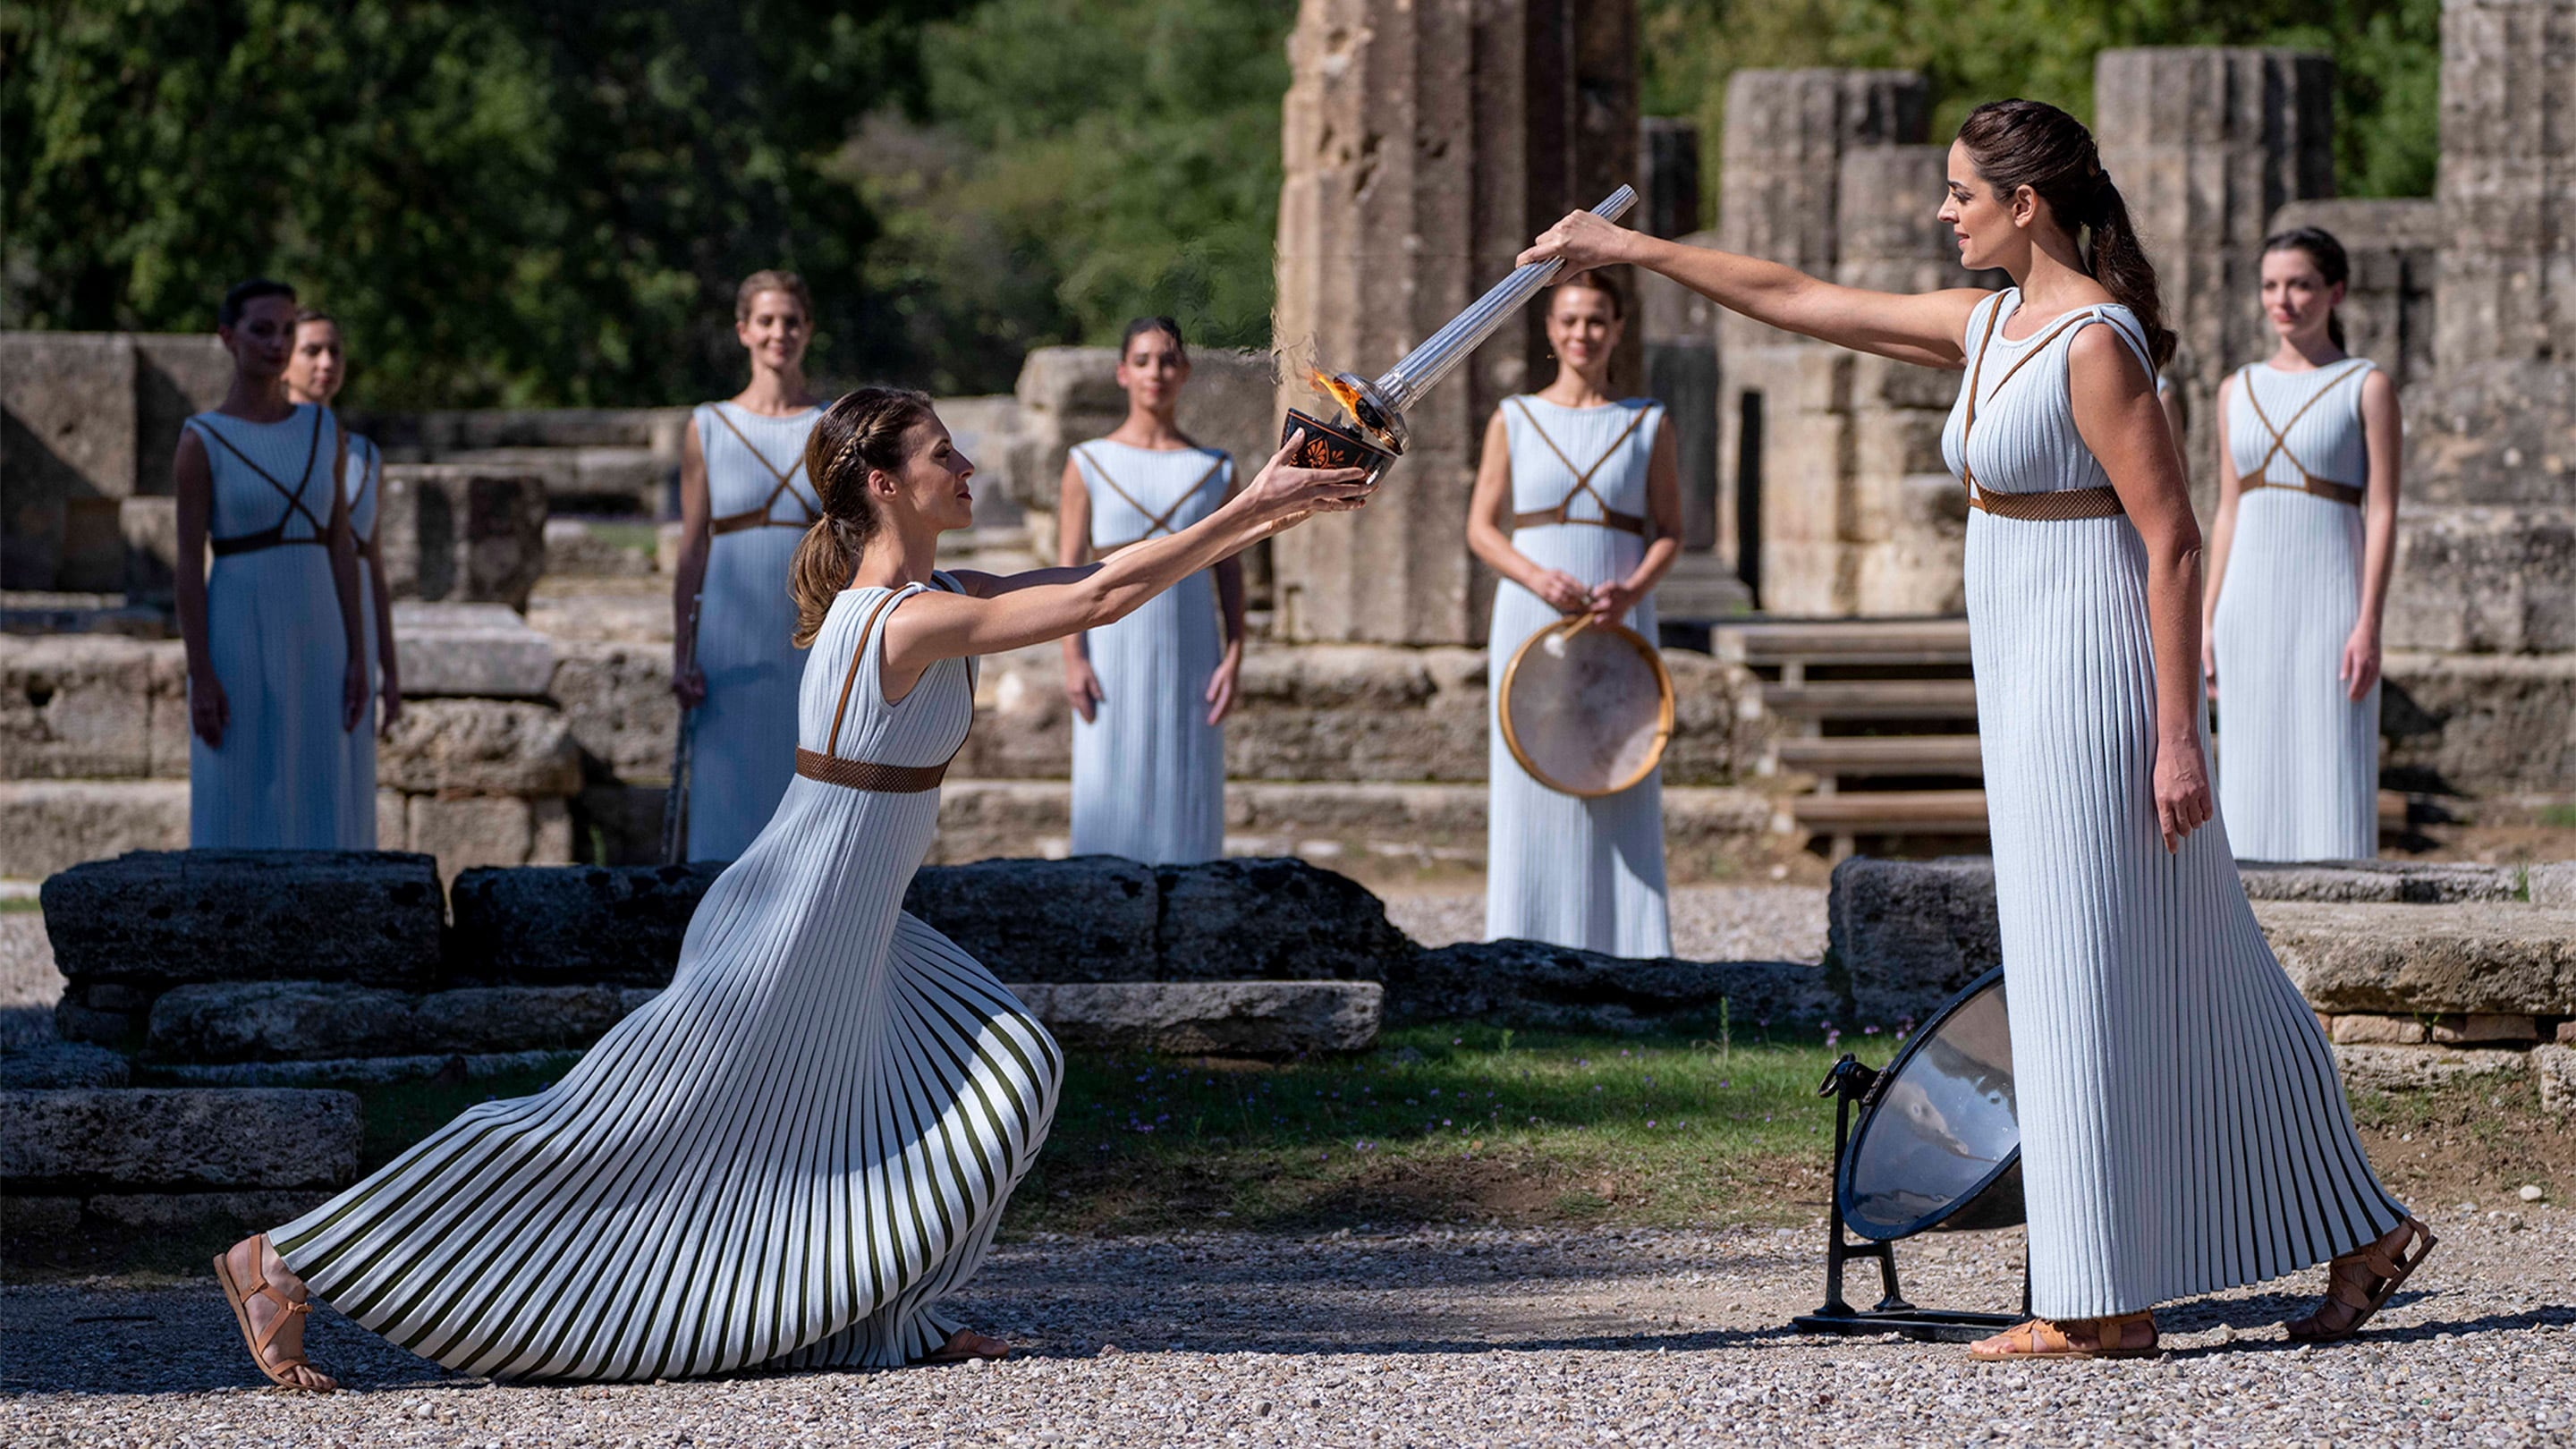 Olympic Flame: Ancient Olympia, The Temple of Hera, The ceremony in the historic Panathenaic Stadium in Athens, Beijing 2022. 2880x1620 HD Wallpaper.